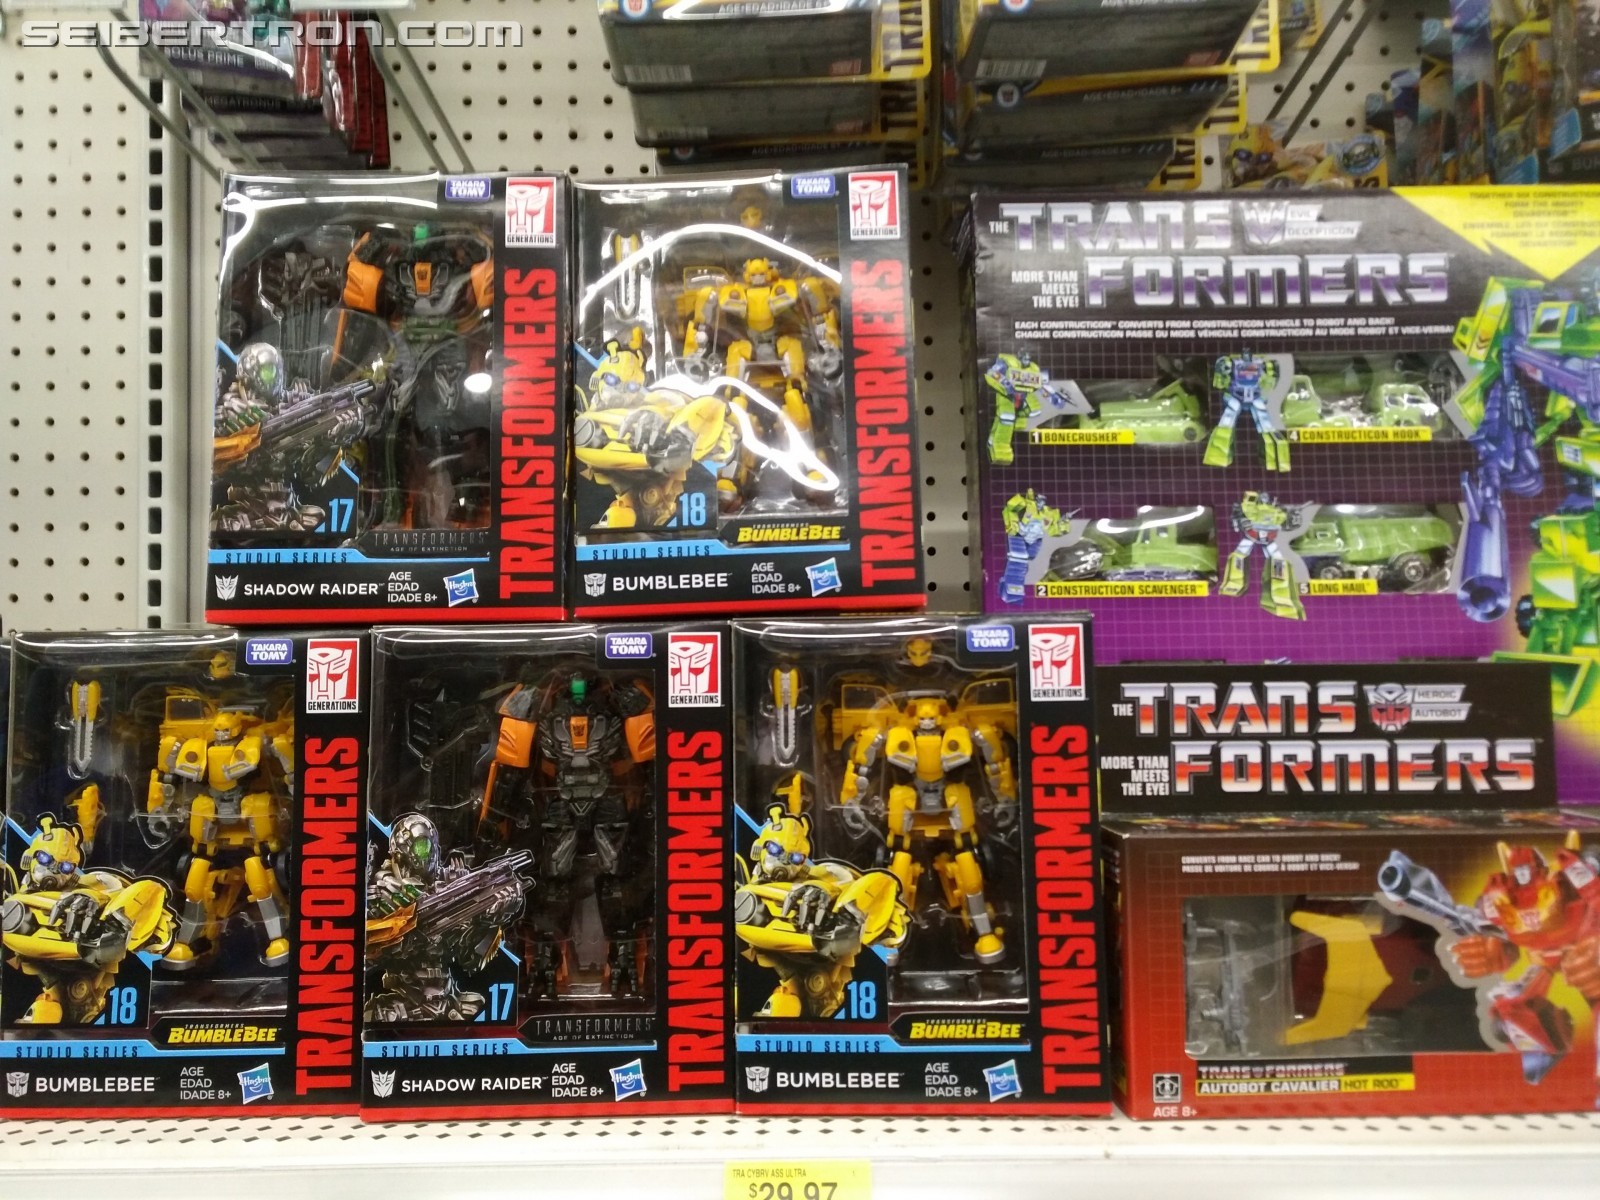 Transformers News: Transformers Studio Series Wave 3 with VW Bumblebee Found at Walmart Canada